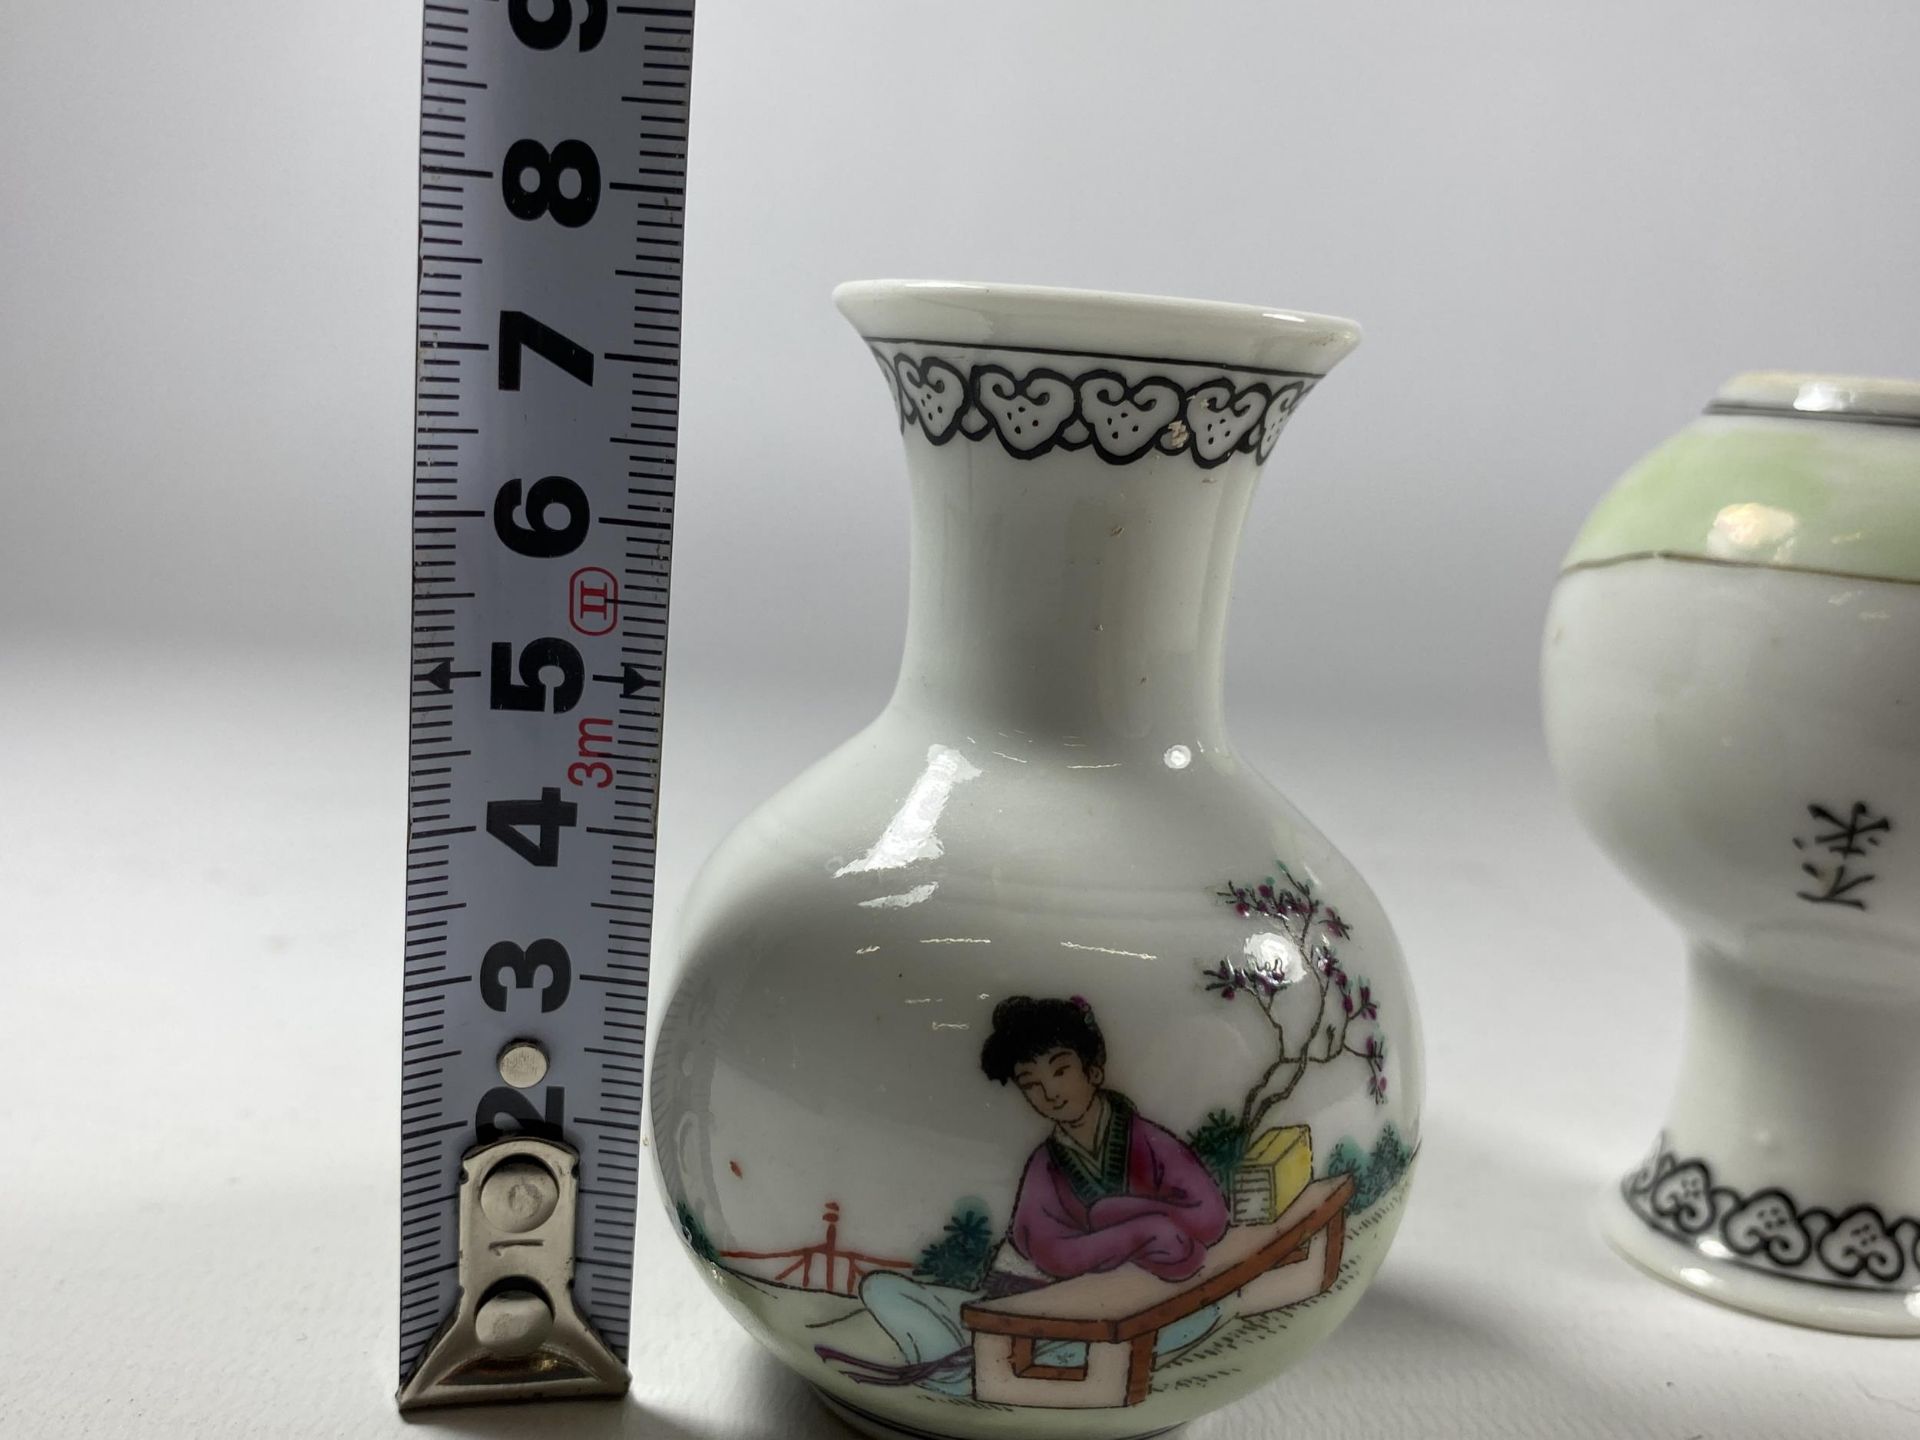 A PAIR OF MINIATURE CHINESE PORCELAIN BOTTLE VASES WITH CALLIGRAPHY DESIGN, HEIGHT 7.5CM - Image 4 of 4